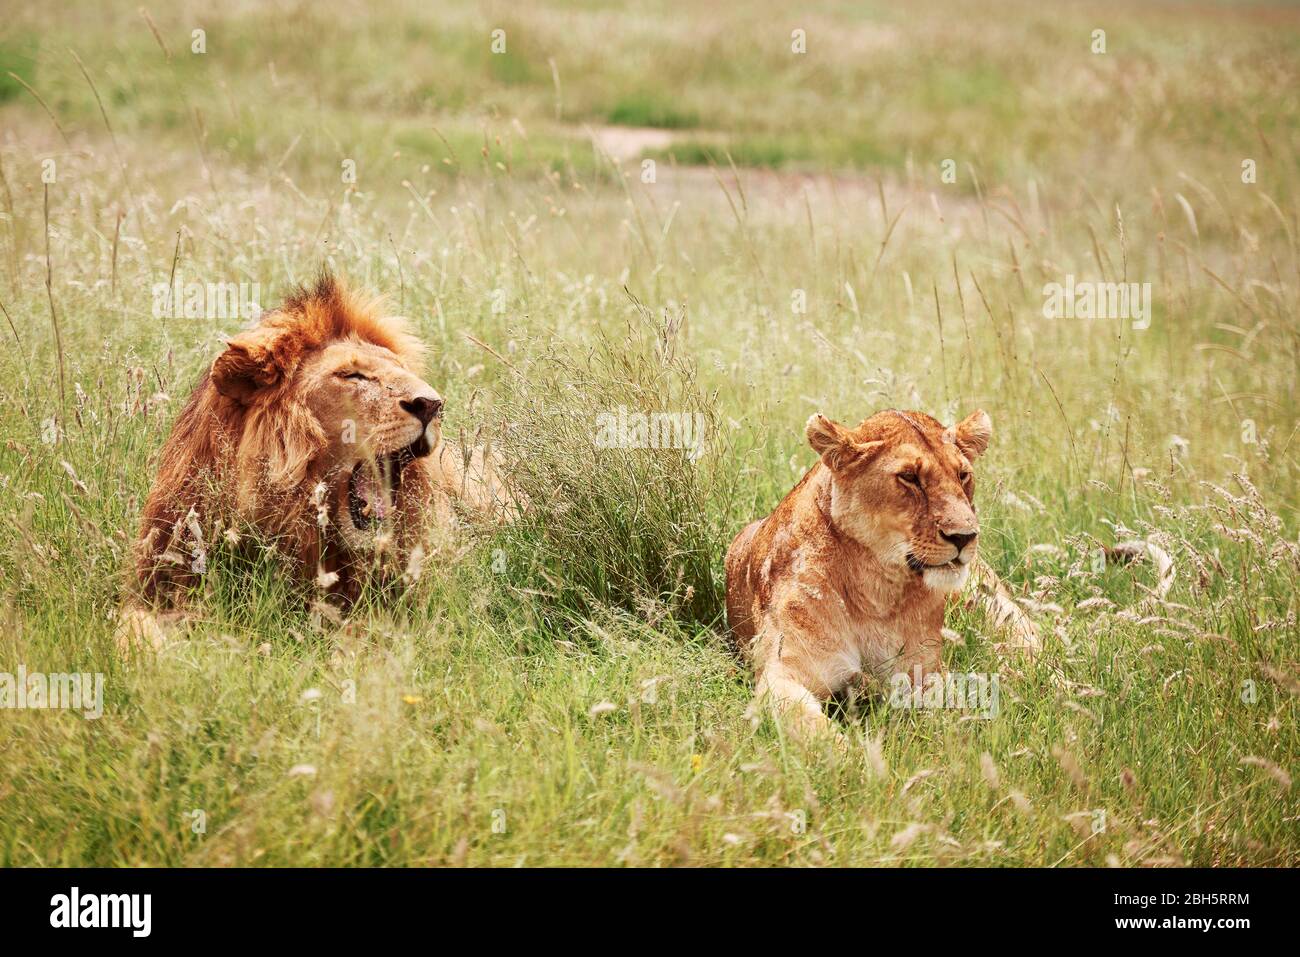 Lion and lioness lying in the grass Stock Photo